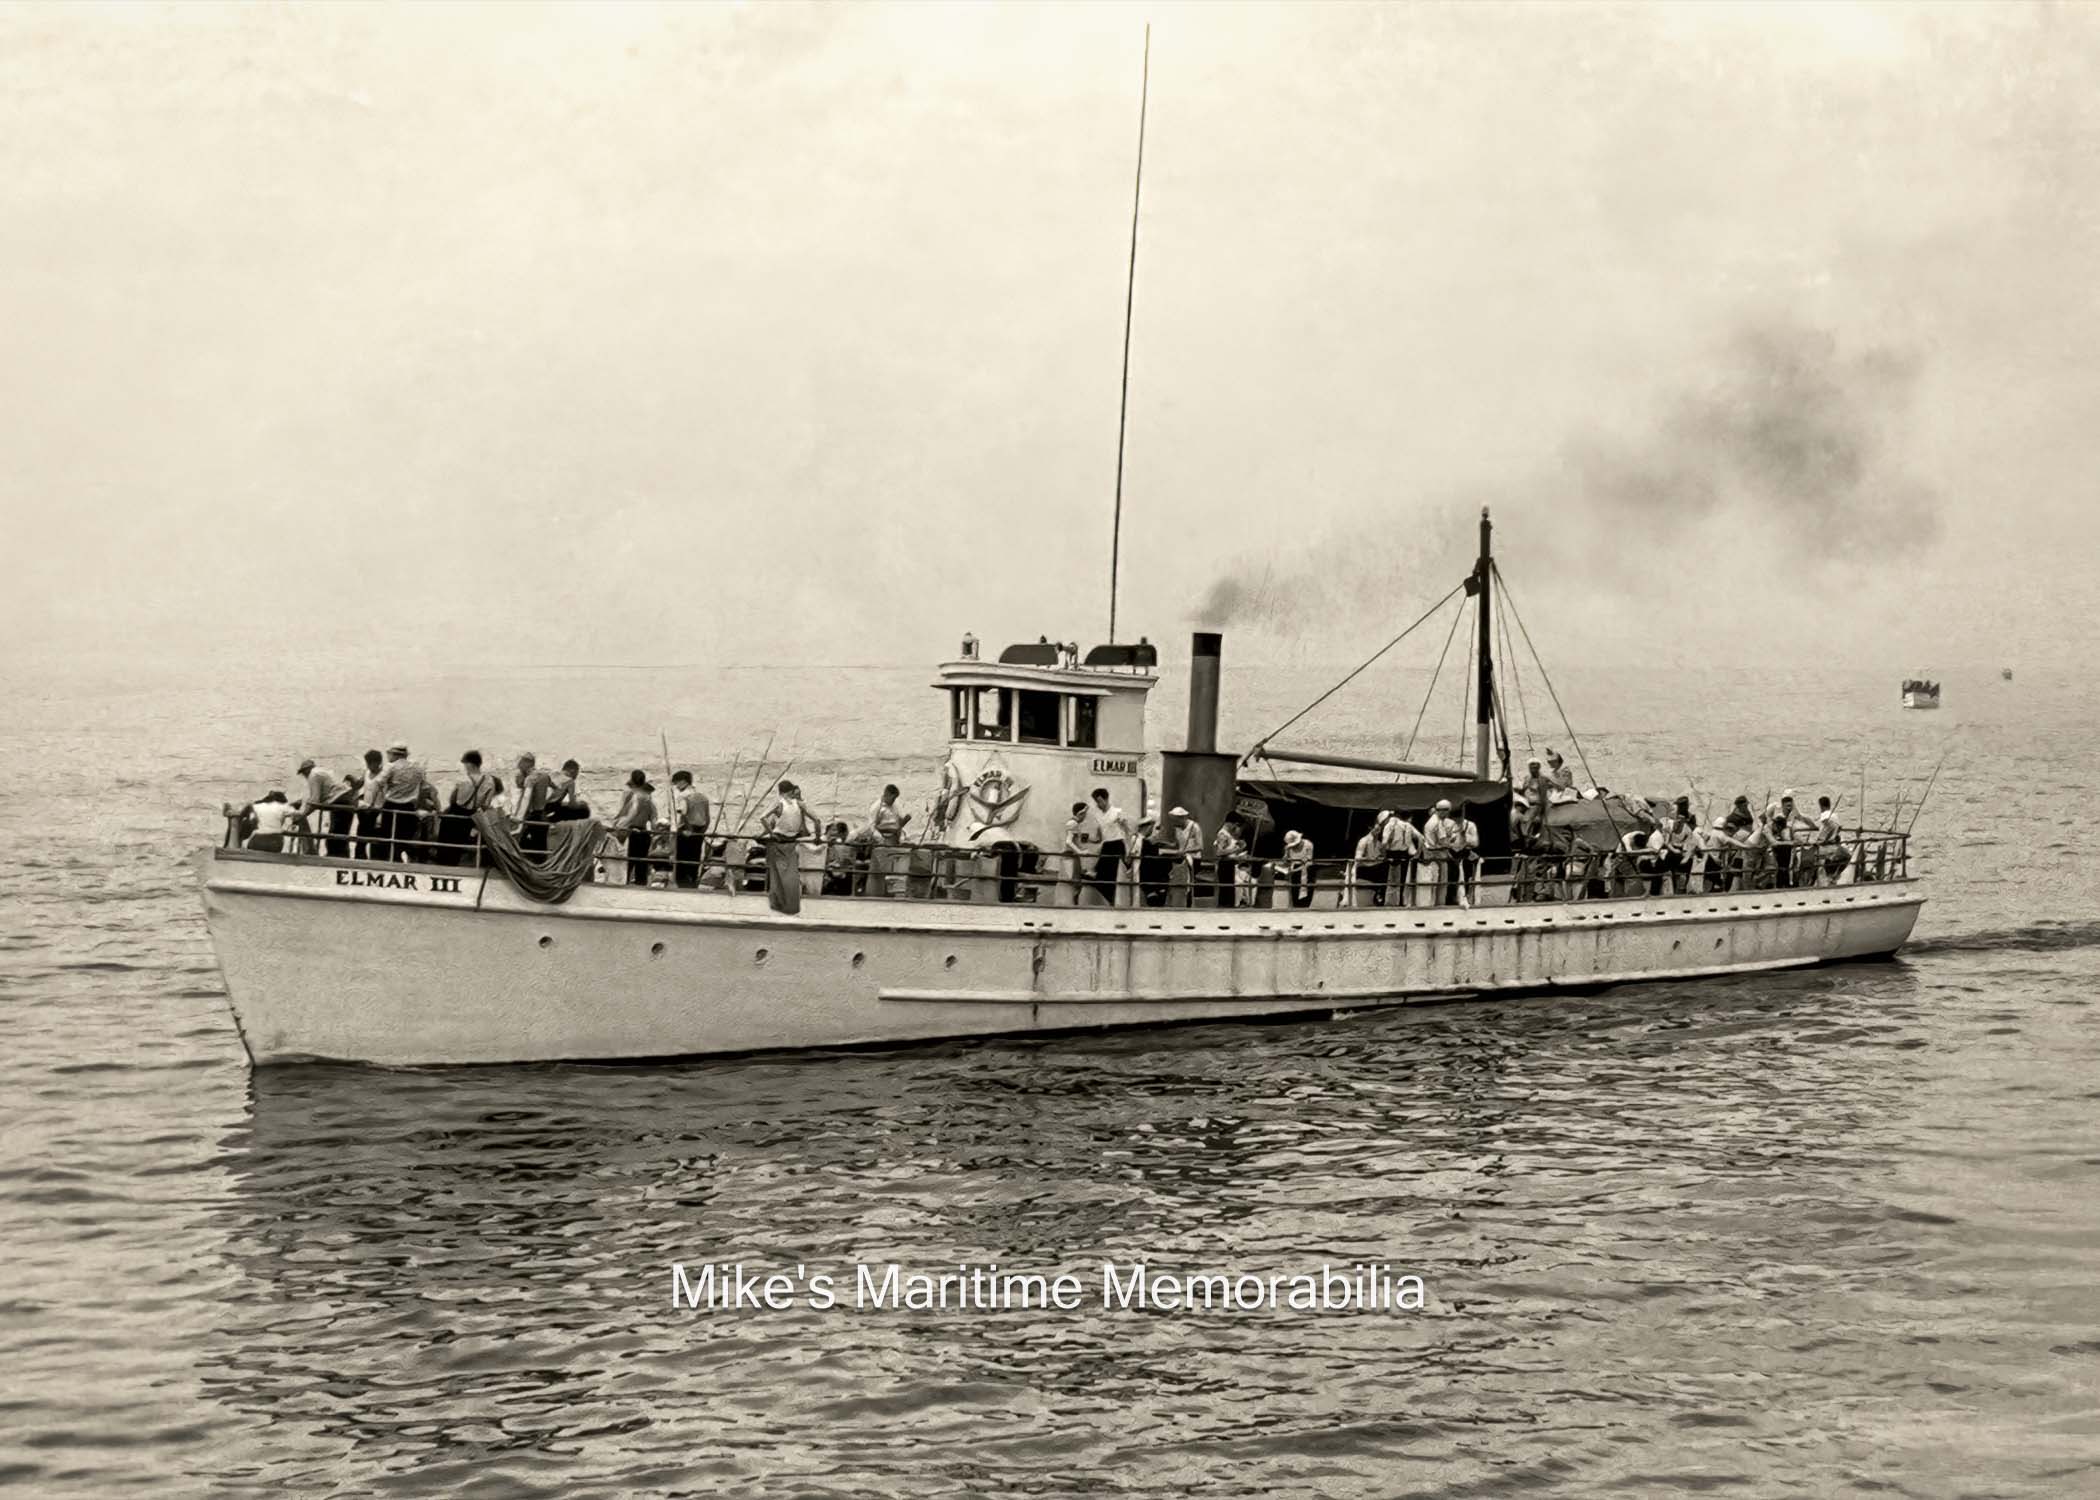 ELMAR III, Brooklyn, NY – 1942 Captain Gus Rau’s "ELMAR III" from Sheepshead Bay, Brooklyn, NY is seen here with a large crowd of anglers off Highlands, NJ in September of 1942. The "ELMAR III" was a converted World War I U.S. Navy Sub Chaser ("SC-186") that was built in 1917 by the International Shipbuilding and Marine Engine Co. at Upper Nyack, NY.